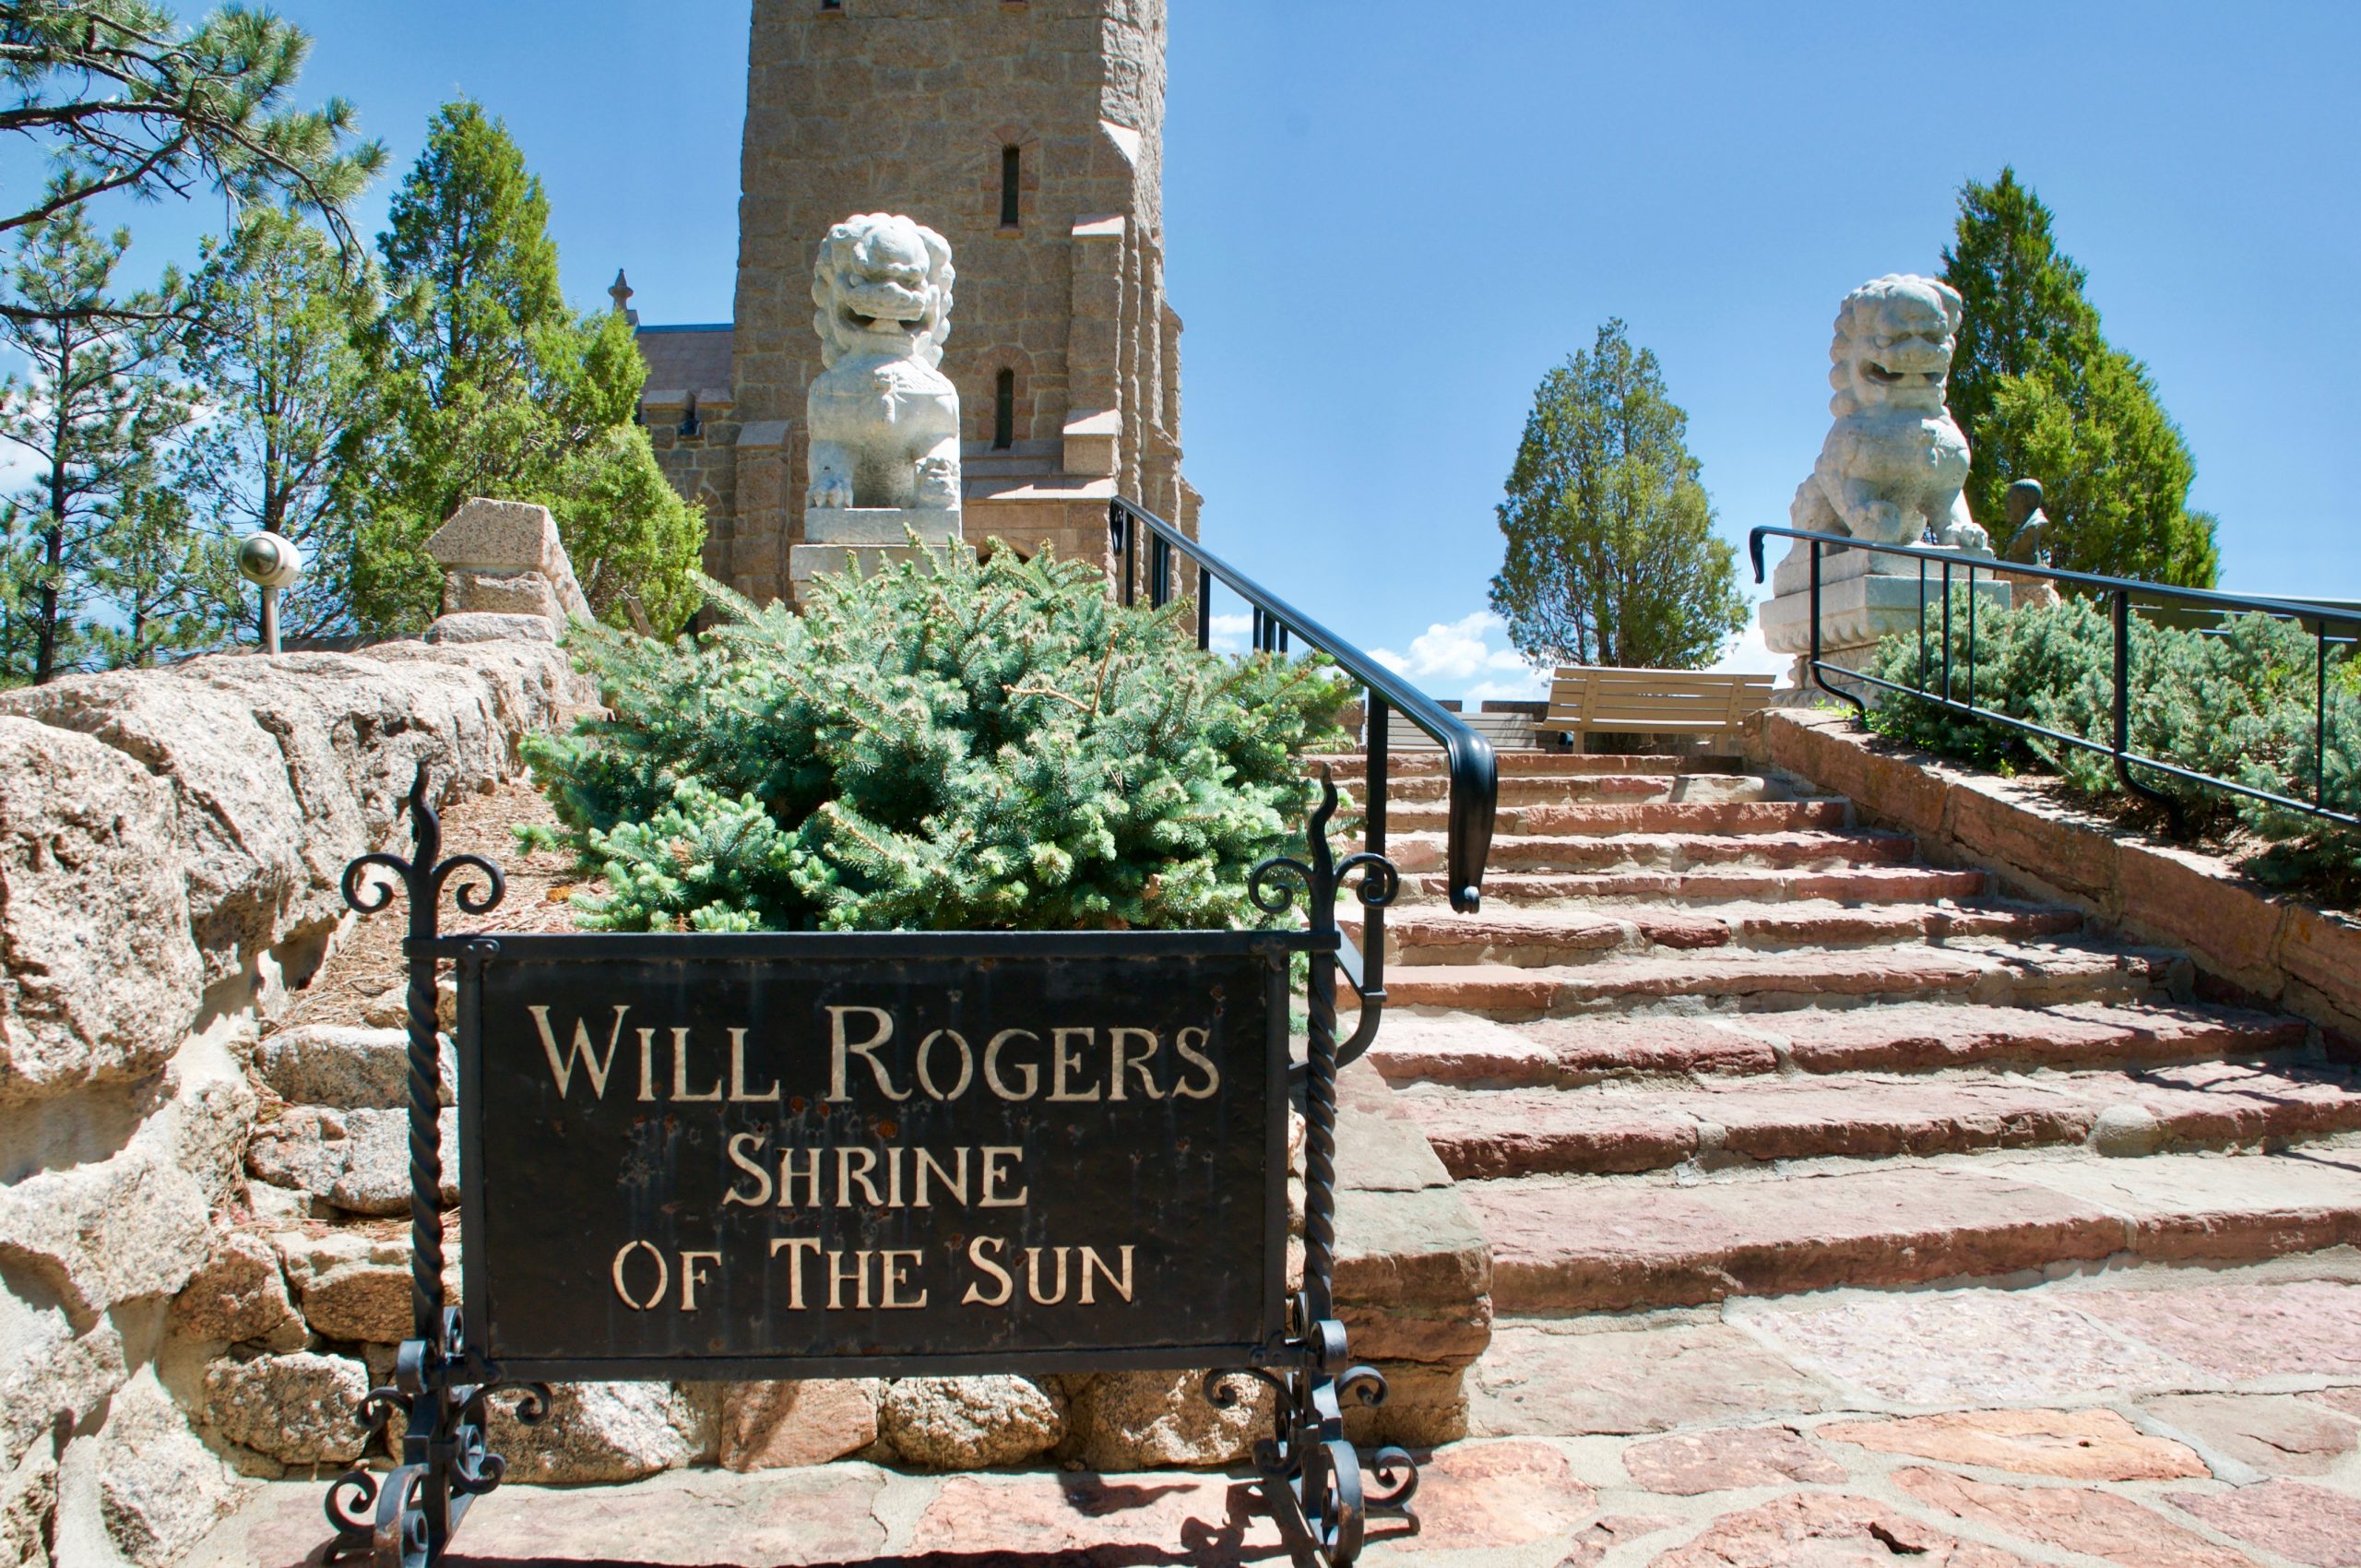 A sign reading "Will Rogers Shrine of the Sun" in front of stone steps.